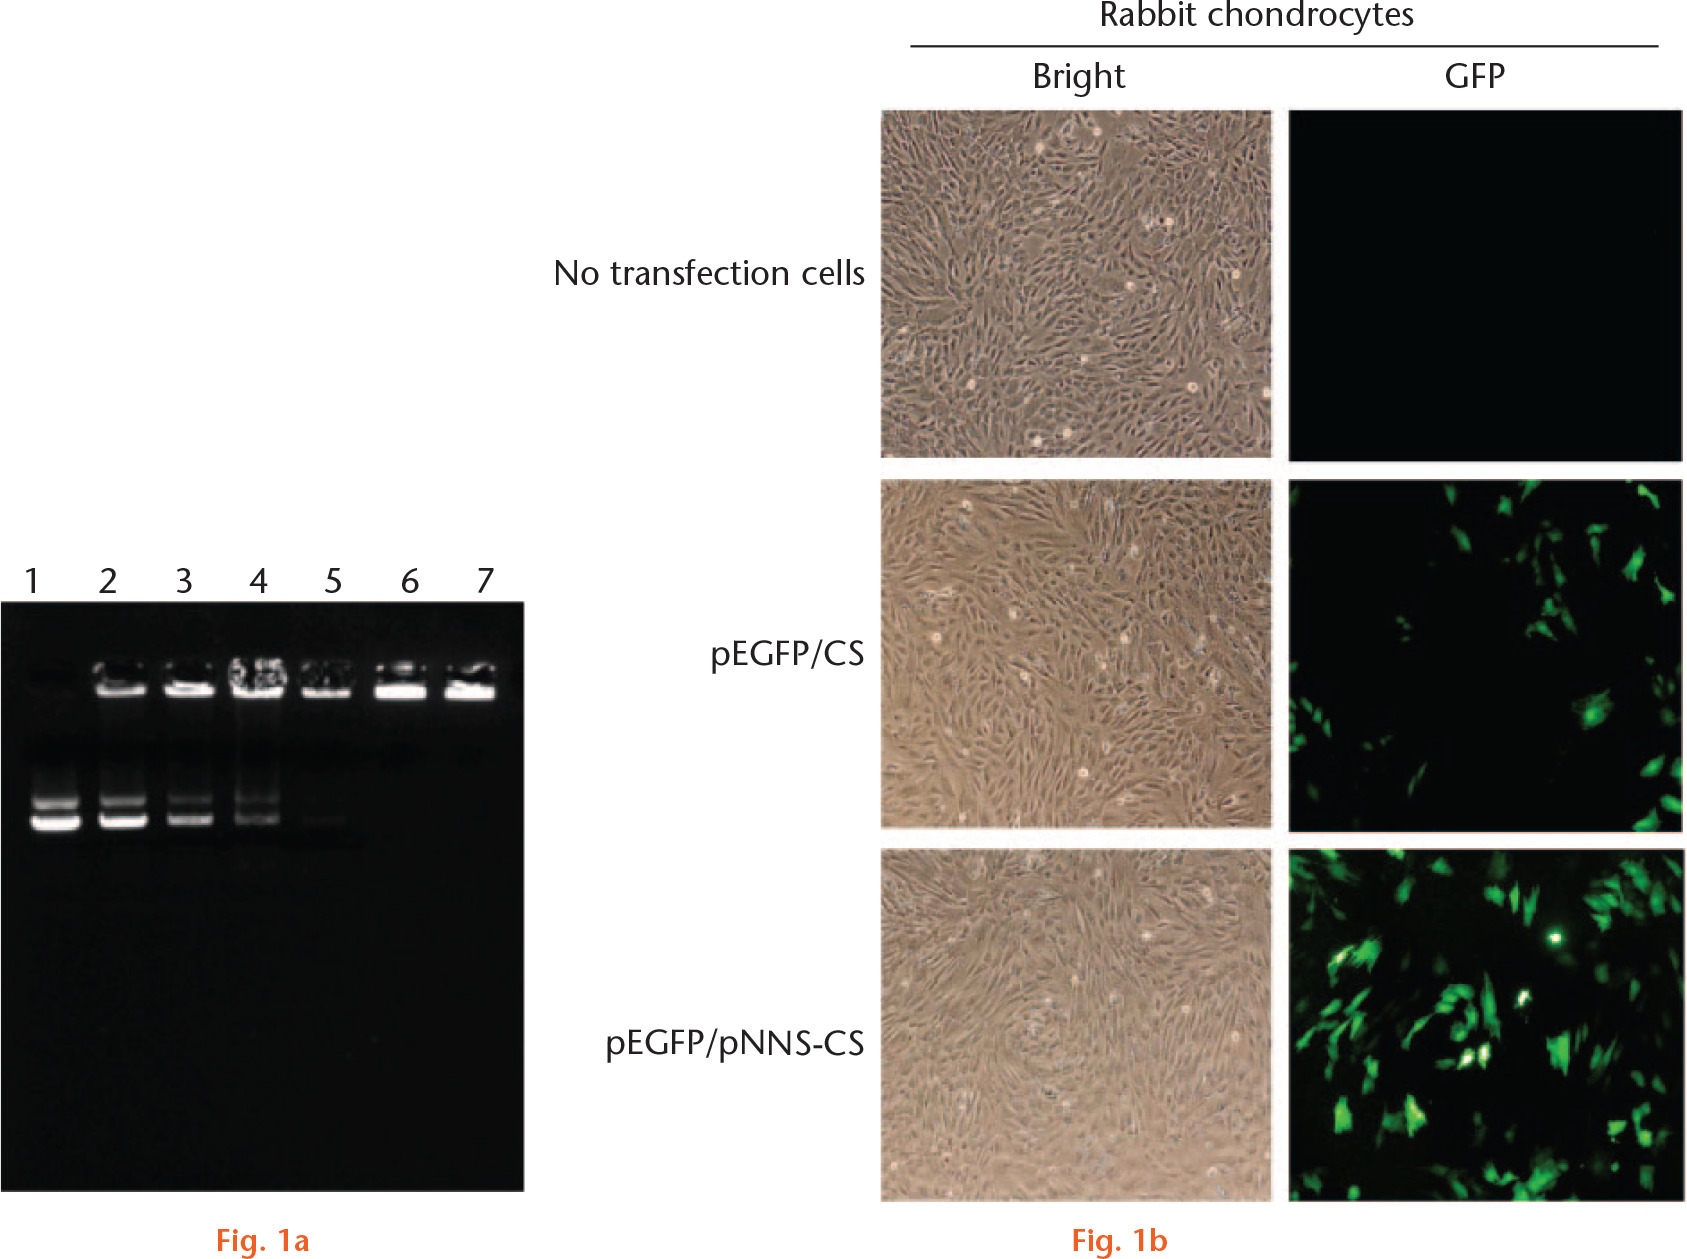 Fig. 1 
            Electrophoresis and transfection efficiency of the plasmid DNA (pDNA)/pNNS conjugated to chitosan (pNNS-CS) complex. a) Agarose gel electrophoresis of the pDNA/pNNS-CS complexes. Lane 1: free pDNA; lanes 2 to 7: pDNA/pNNS-CS (w/w) = 1:0.25; 1:0.5; 1:1; 1:1.5; 1:2; 1:2.5. When pDNA/pNNS-CS reached a weight ratio of 1:2, these complexes lost their mobility in the gel. b) The transfection efficiency of pDNA/pNNS-CS and pDNA/CS complexes in rabbit chondrocytes. Chondrocytes were transfected with pEGFP/pNNS-CS and pEGFP/CS for 72 hours; then green fluorescent protein (GFP) was observed under a fluorescence microscope (100×).
          